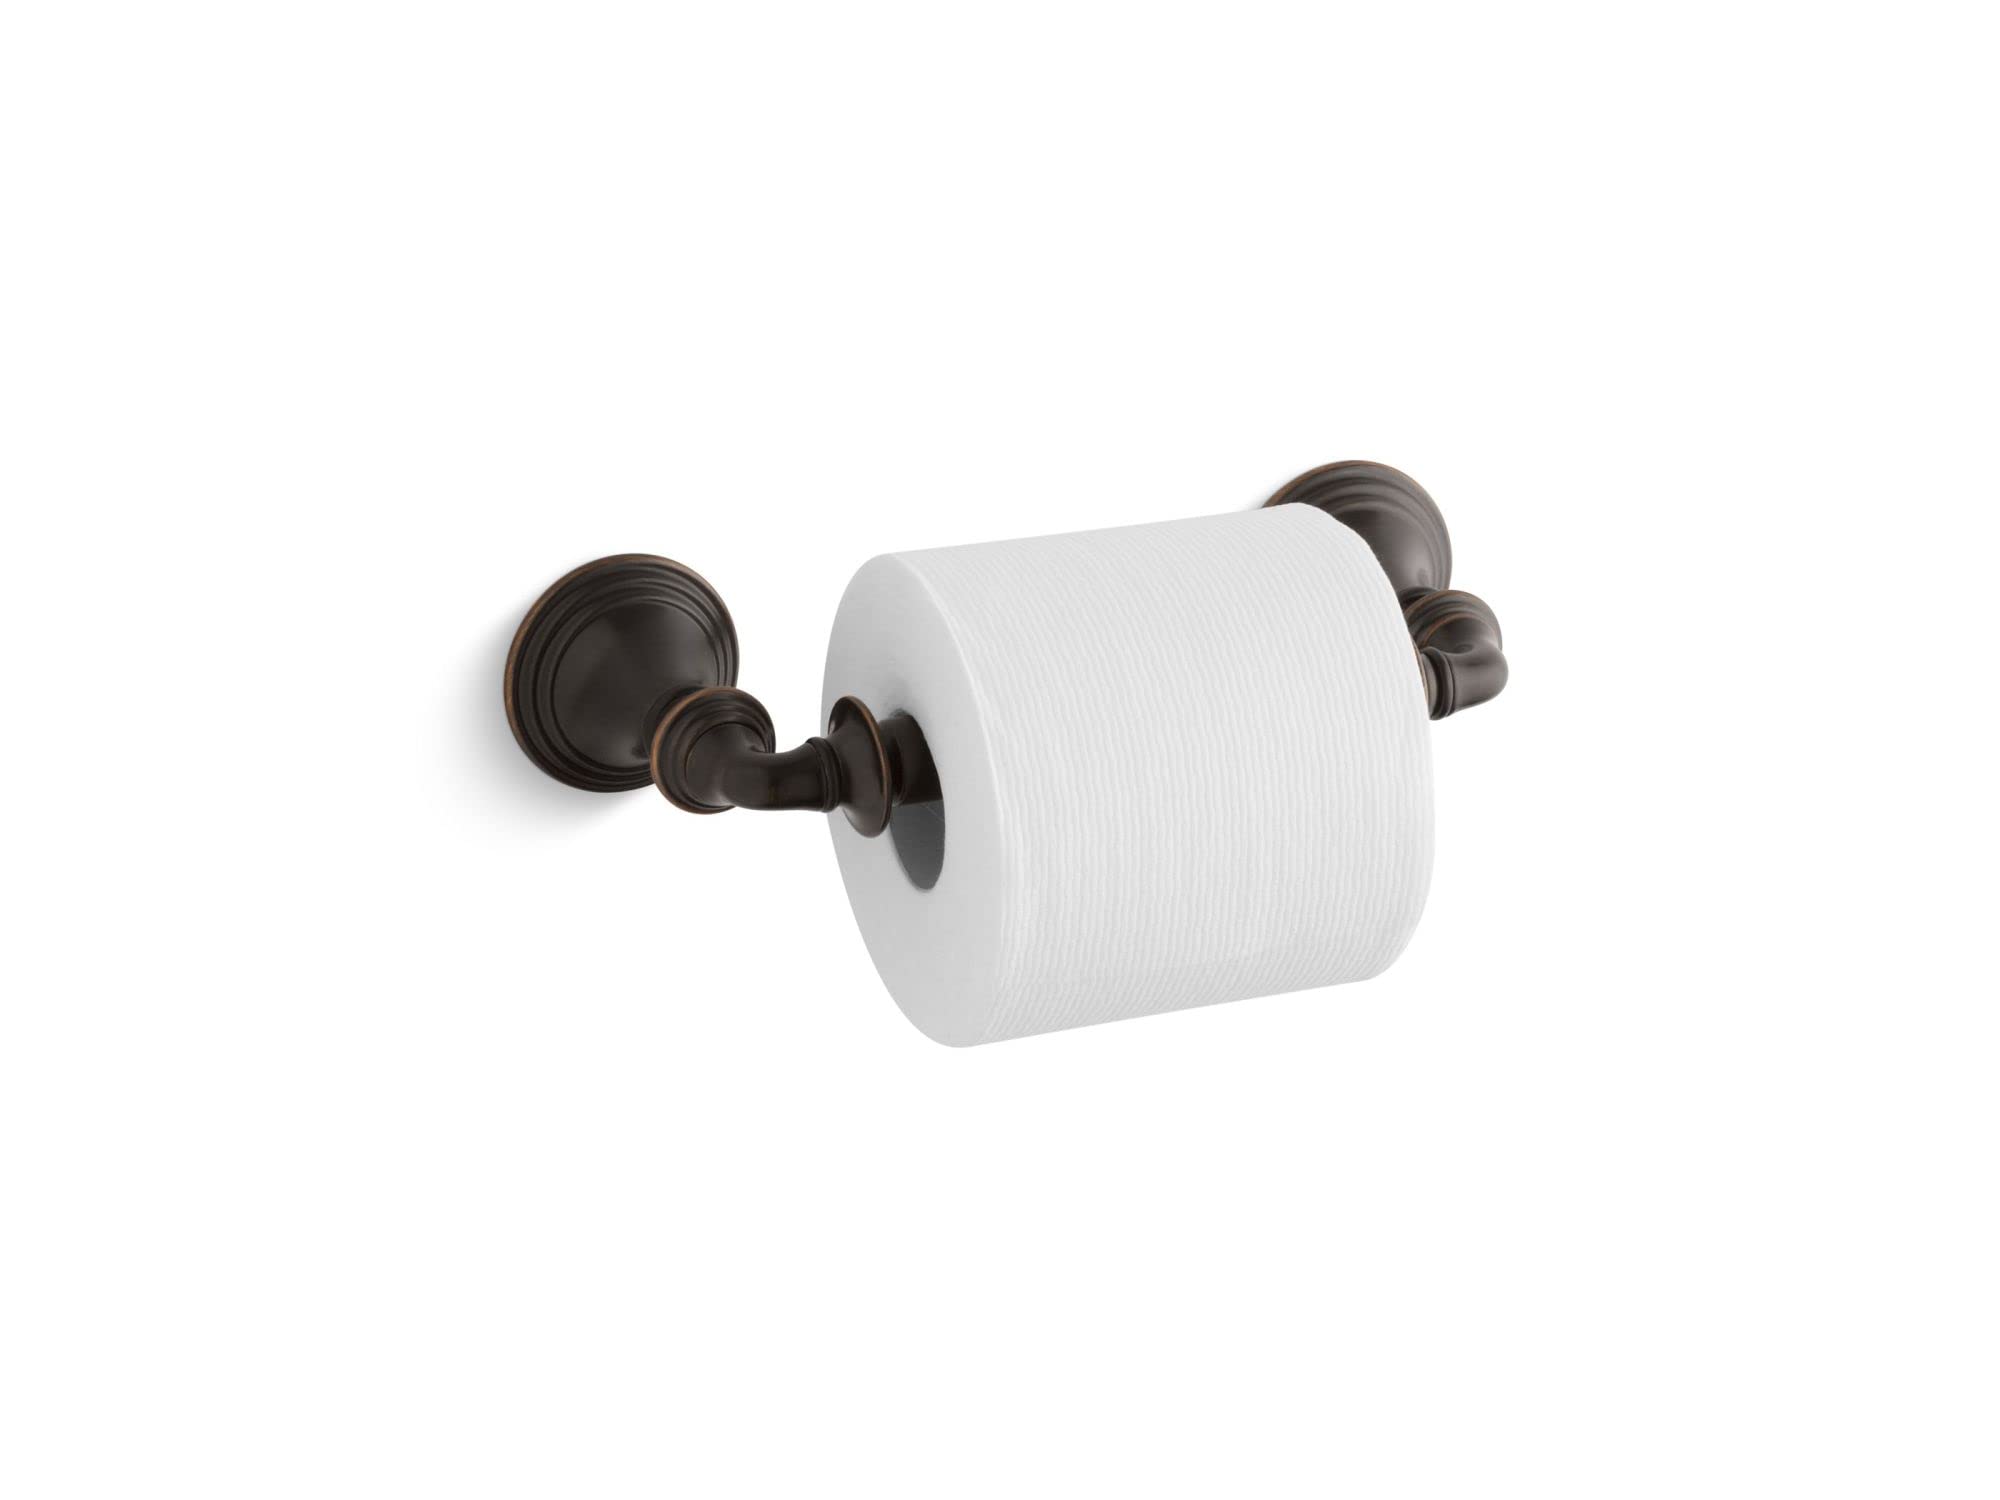 How Do You Put The Toilet Paper Into A Kohler Kelston Oil Rubbed Bronze Toilet Paper Holder